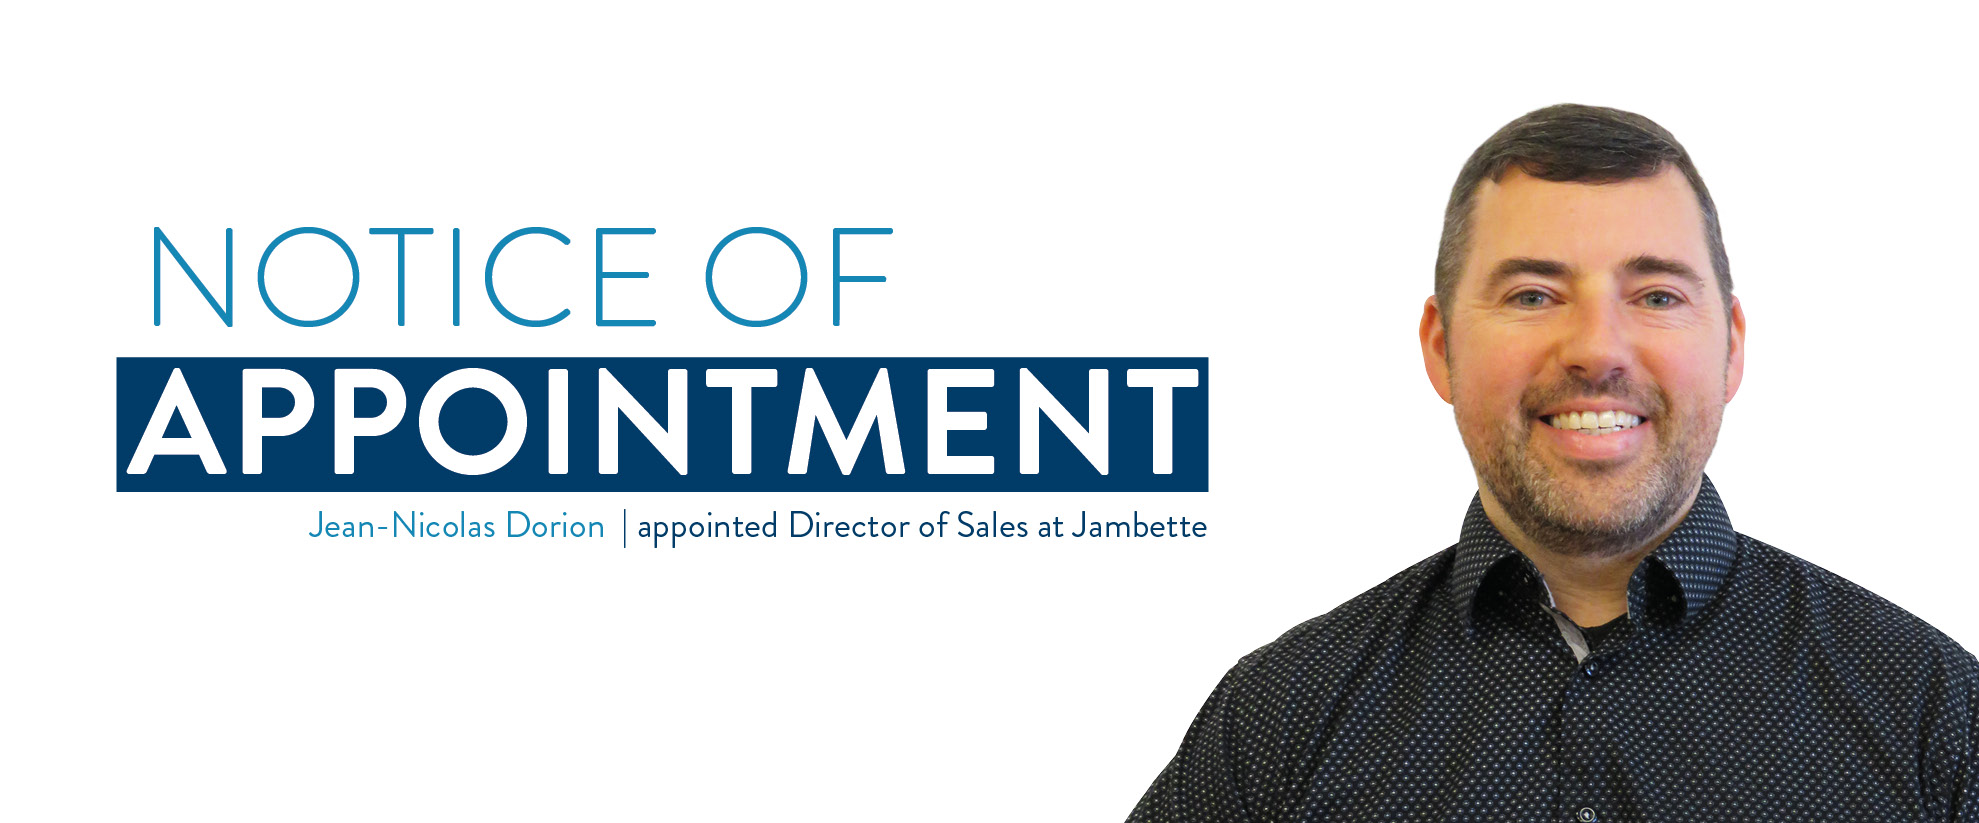 Notice of appointment: Jean-Nicolas Dorion named Director of Sales of Jambette